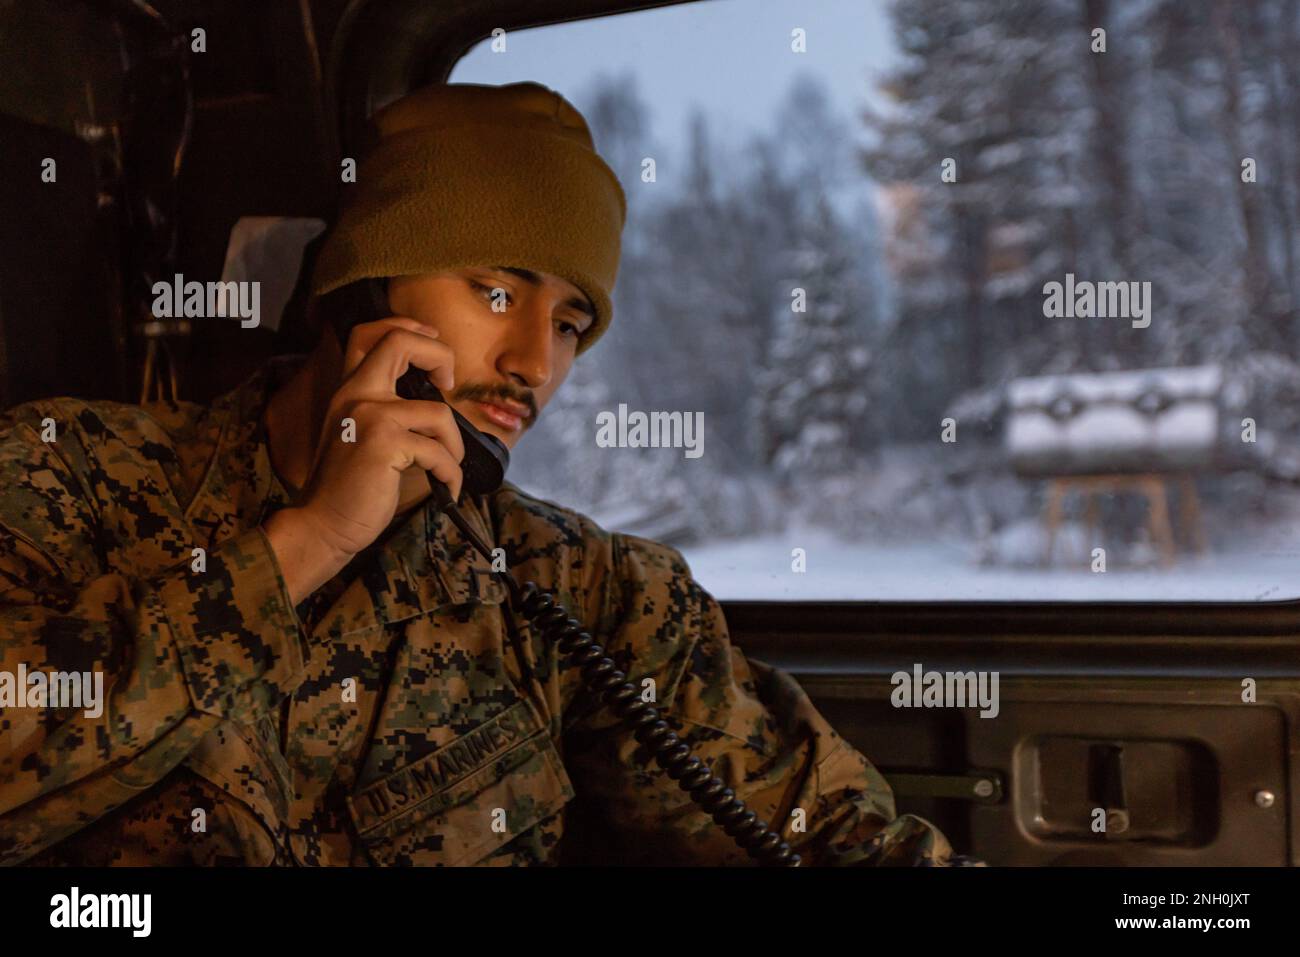 U.S. Marine Corps Pfc. Paul Speers, a telephone systems/personal computer repairer with Communications Company, Headquarters Battalion, 2d Marine Division, performs communications checks on equipment installed in a Bandvagn 206 vehicle in Setermoen, Norway on Dec. 5, 2022. This communications upgrade enables U.S. Forces to better communicate during operations and exercises as well as set the groundwork for advanced communications capabilities with NATO Allies in the future. Stock Photo